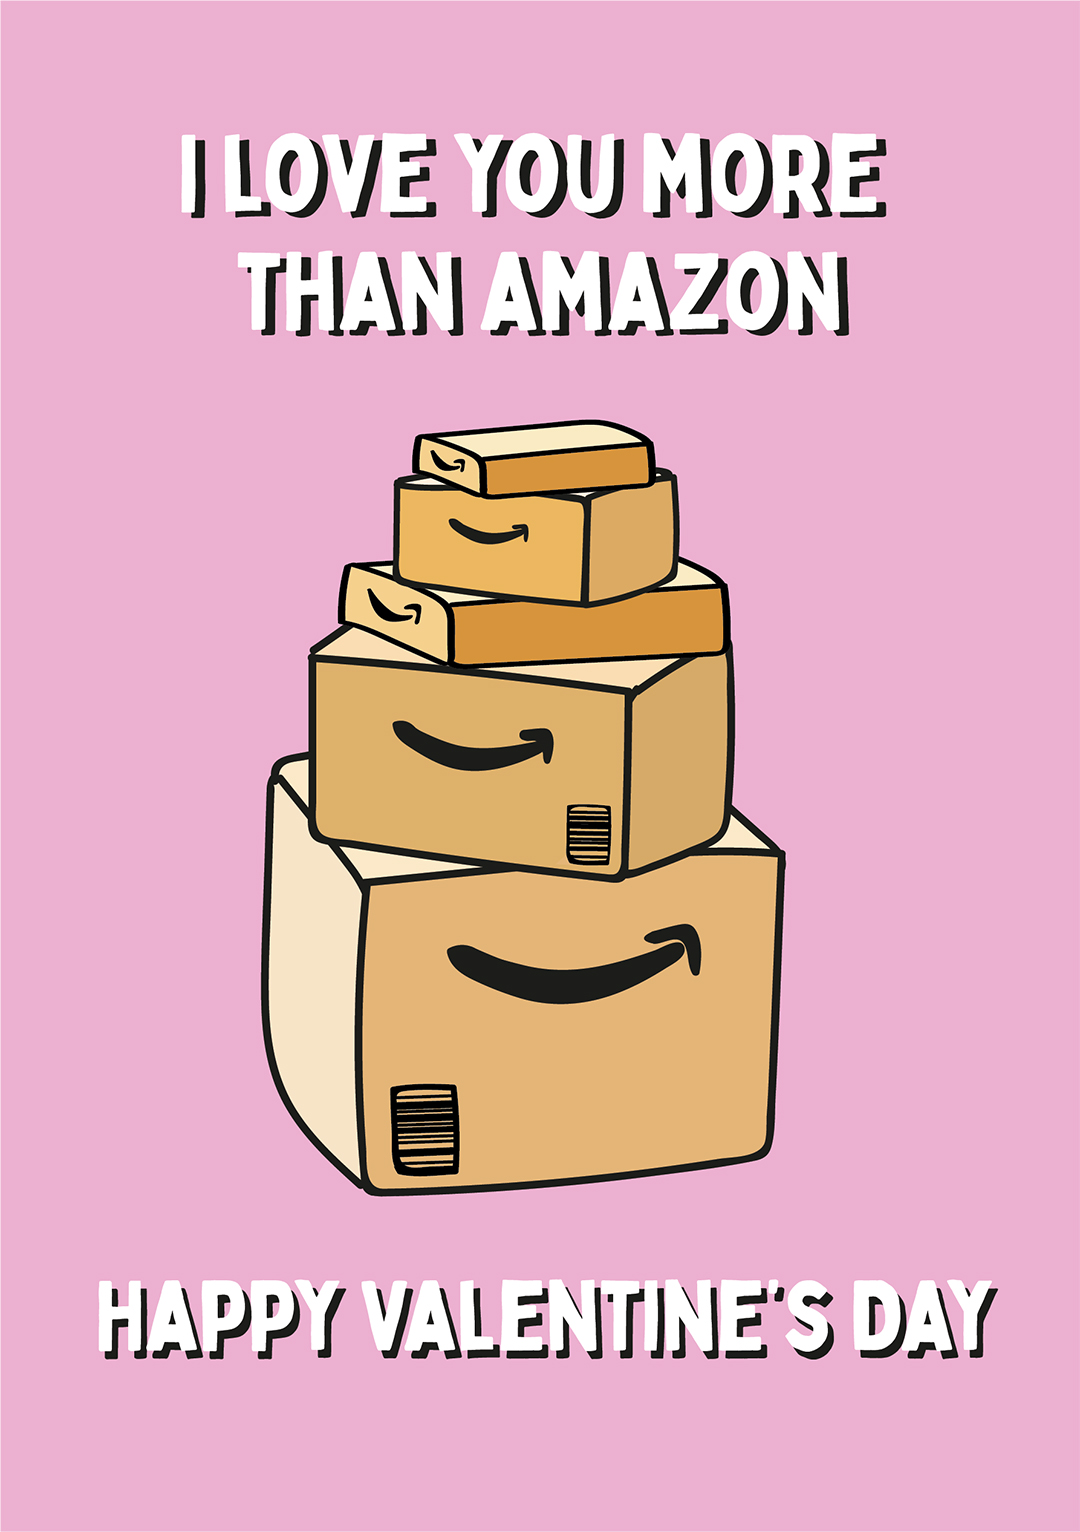 Love You More Than Amazon - Valentine's Day Card